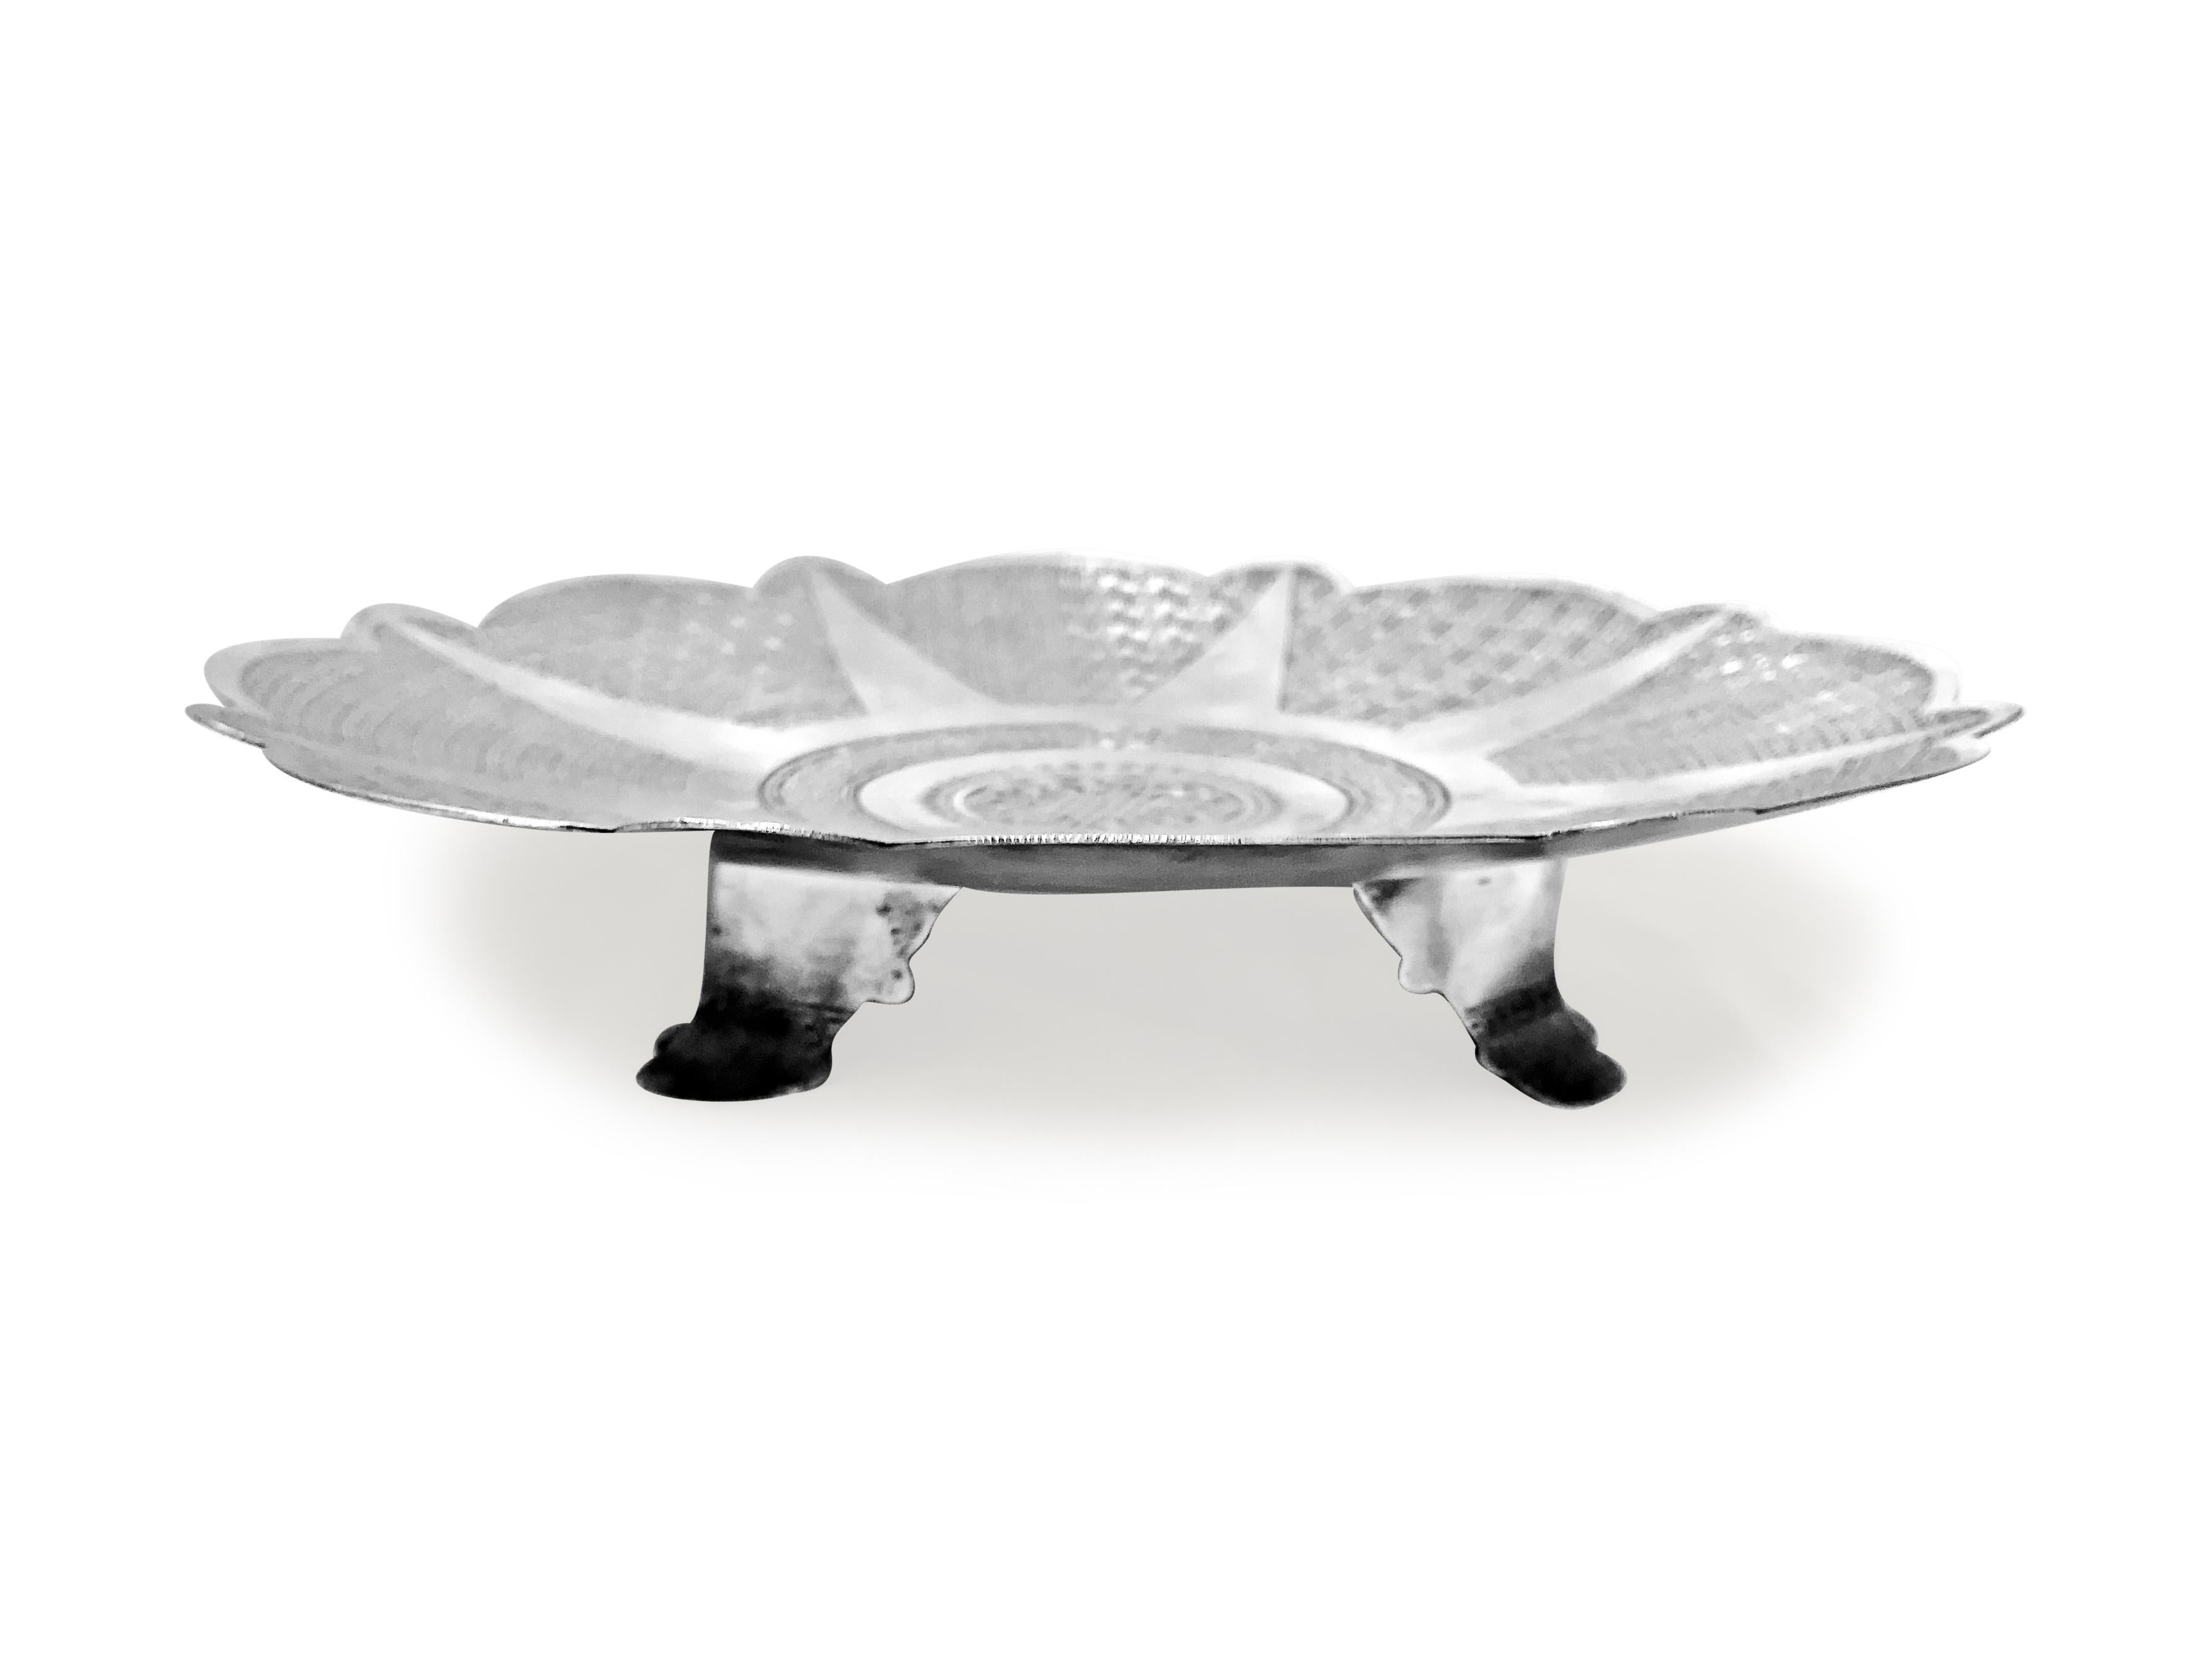 Women's or Men's Antique Silver Round Tray with Hand Curved For Sale